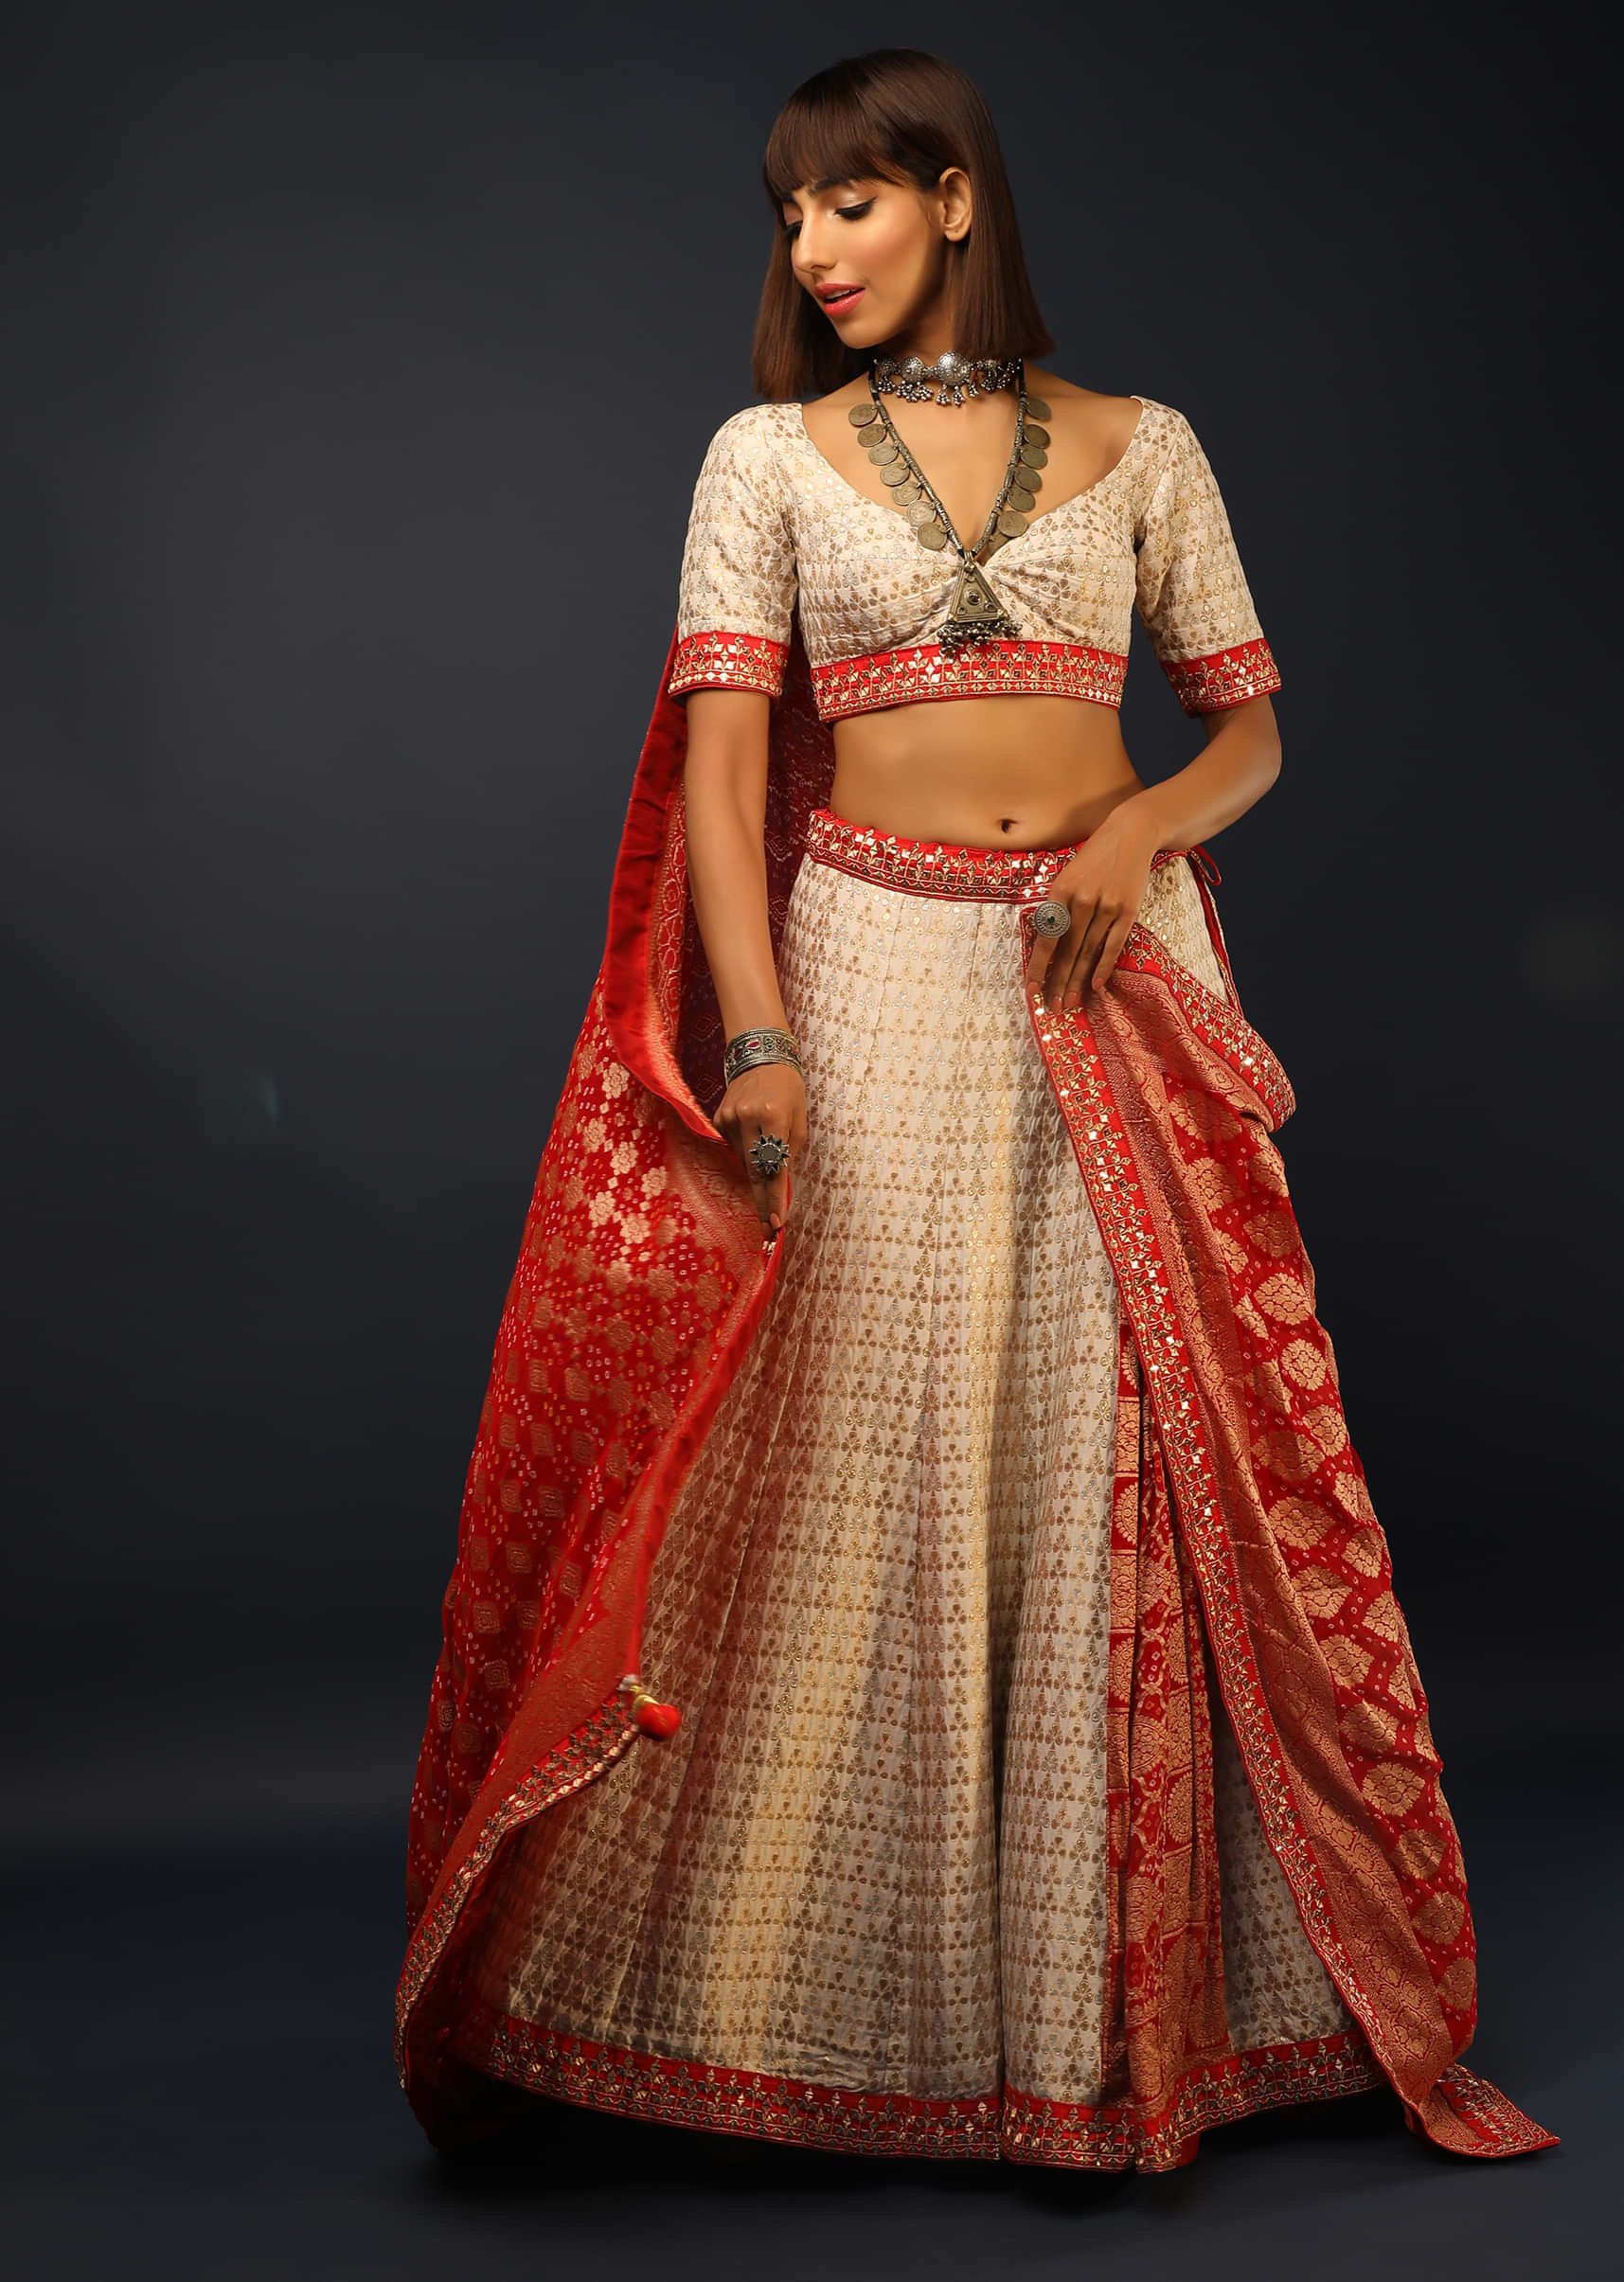 Brides Are Adding Bandhej Dupattas To Their Wedding Look & We're Loving It!  | Indian bride outfits, Indian bridal outfits, Wedding looks